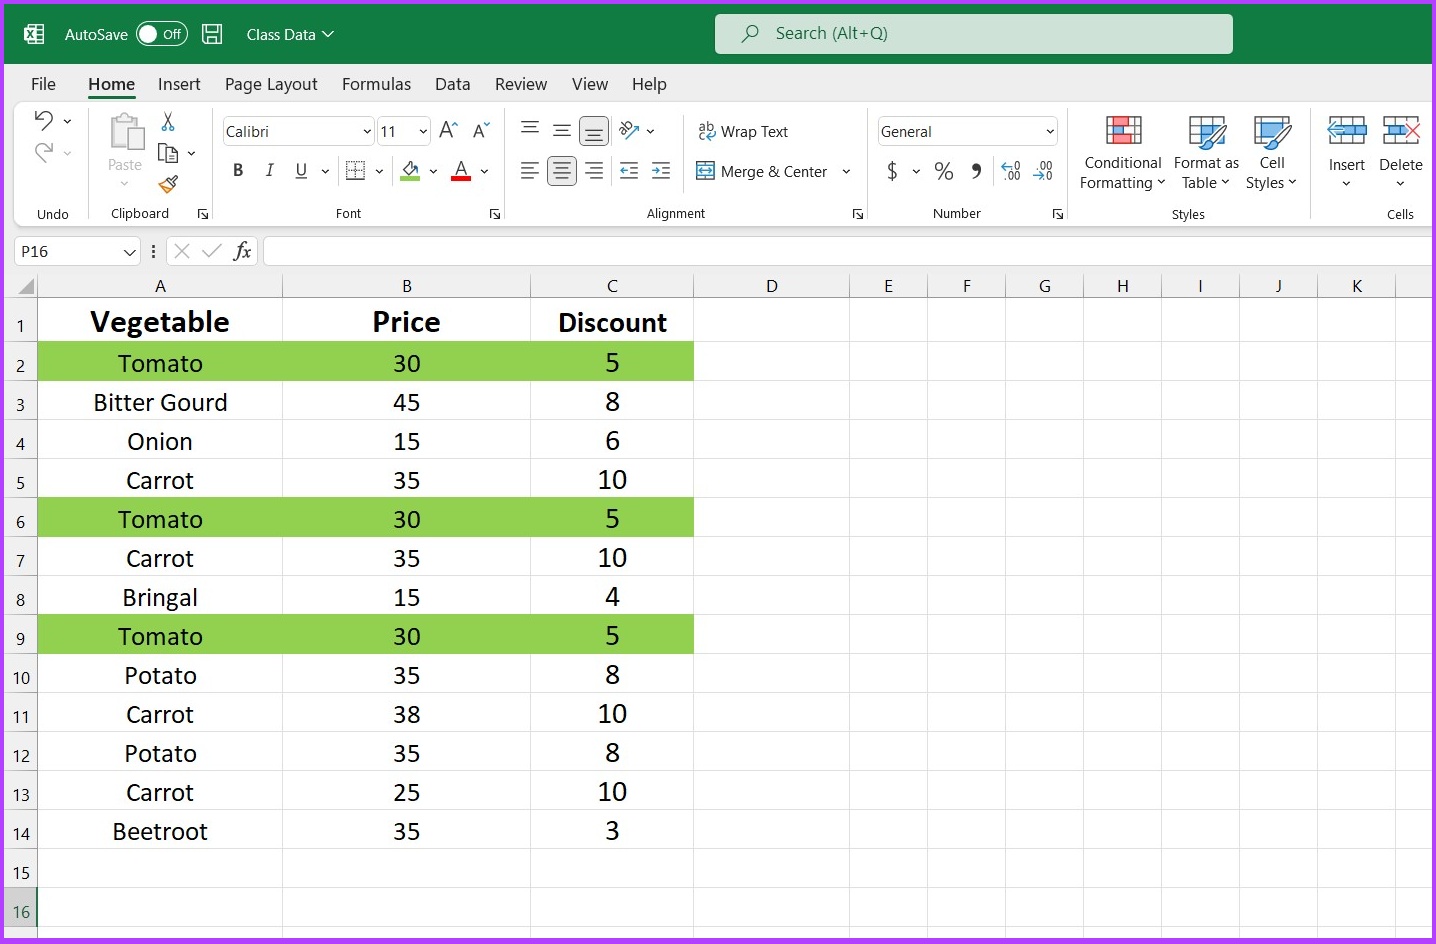 Excel will produce the result based on your query